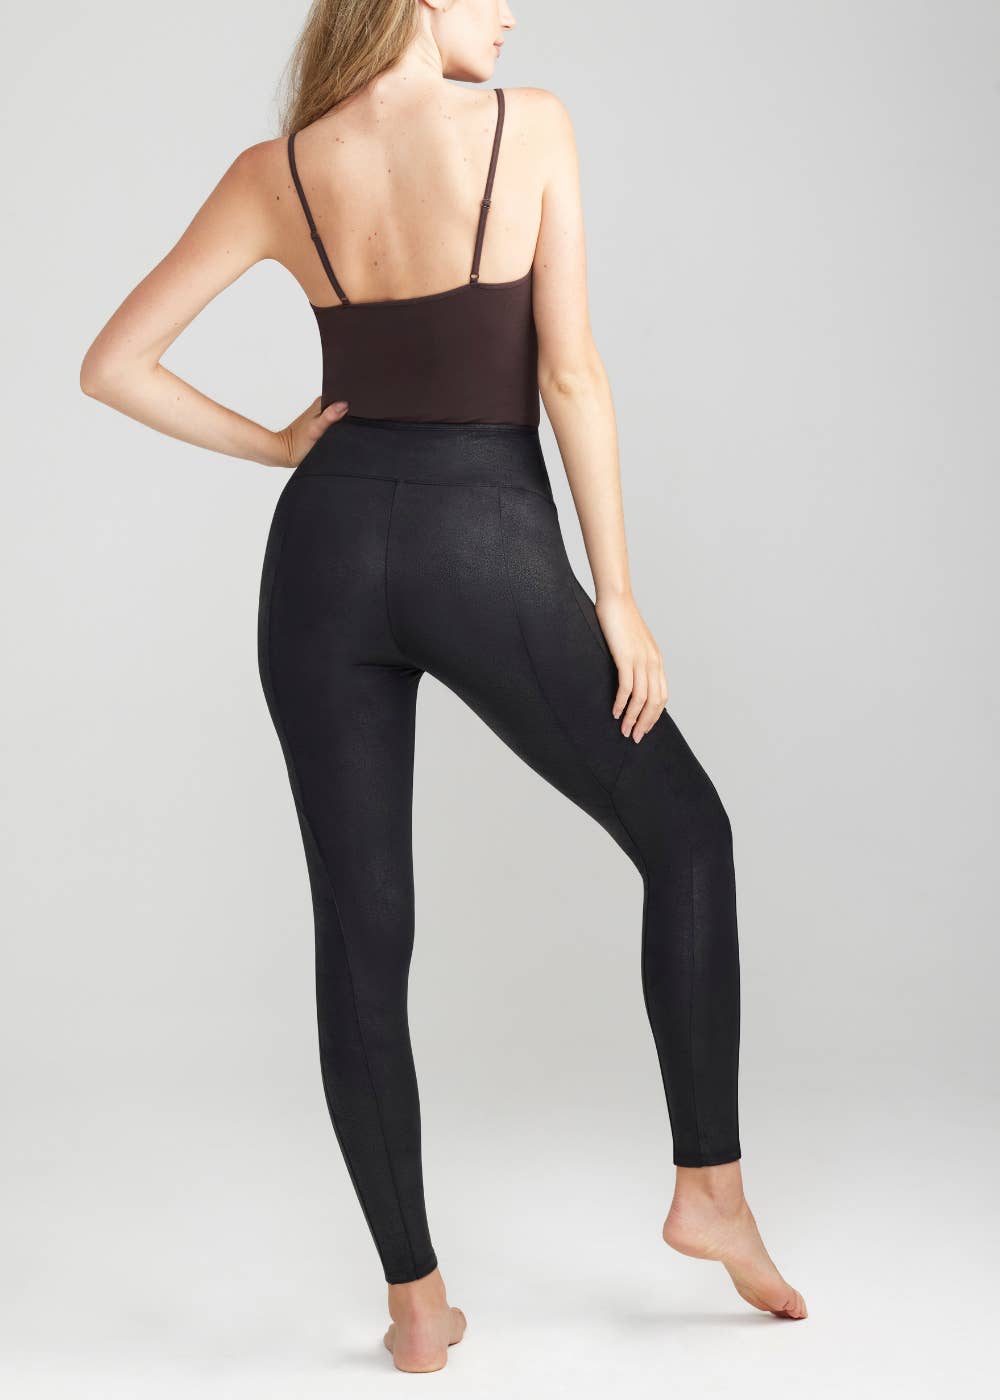 Stretch and Shine Faux Leather Shaping Legging - Yummie